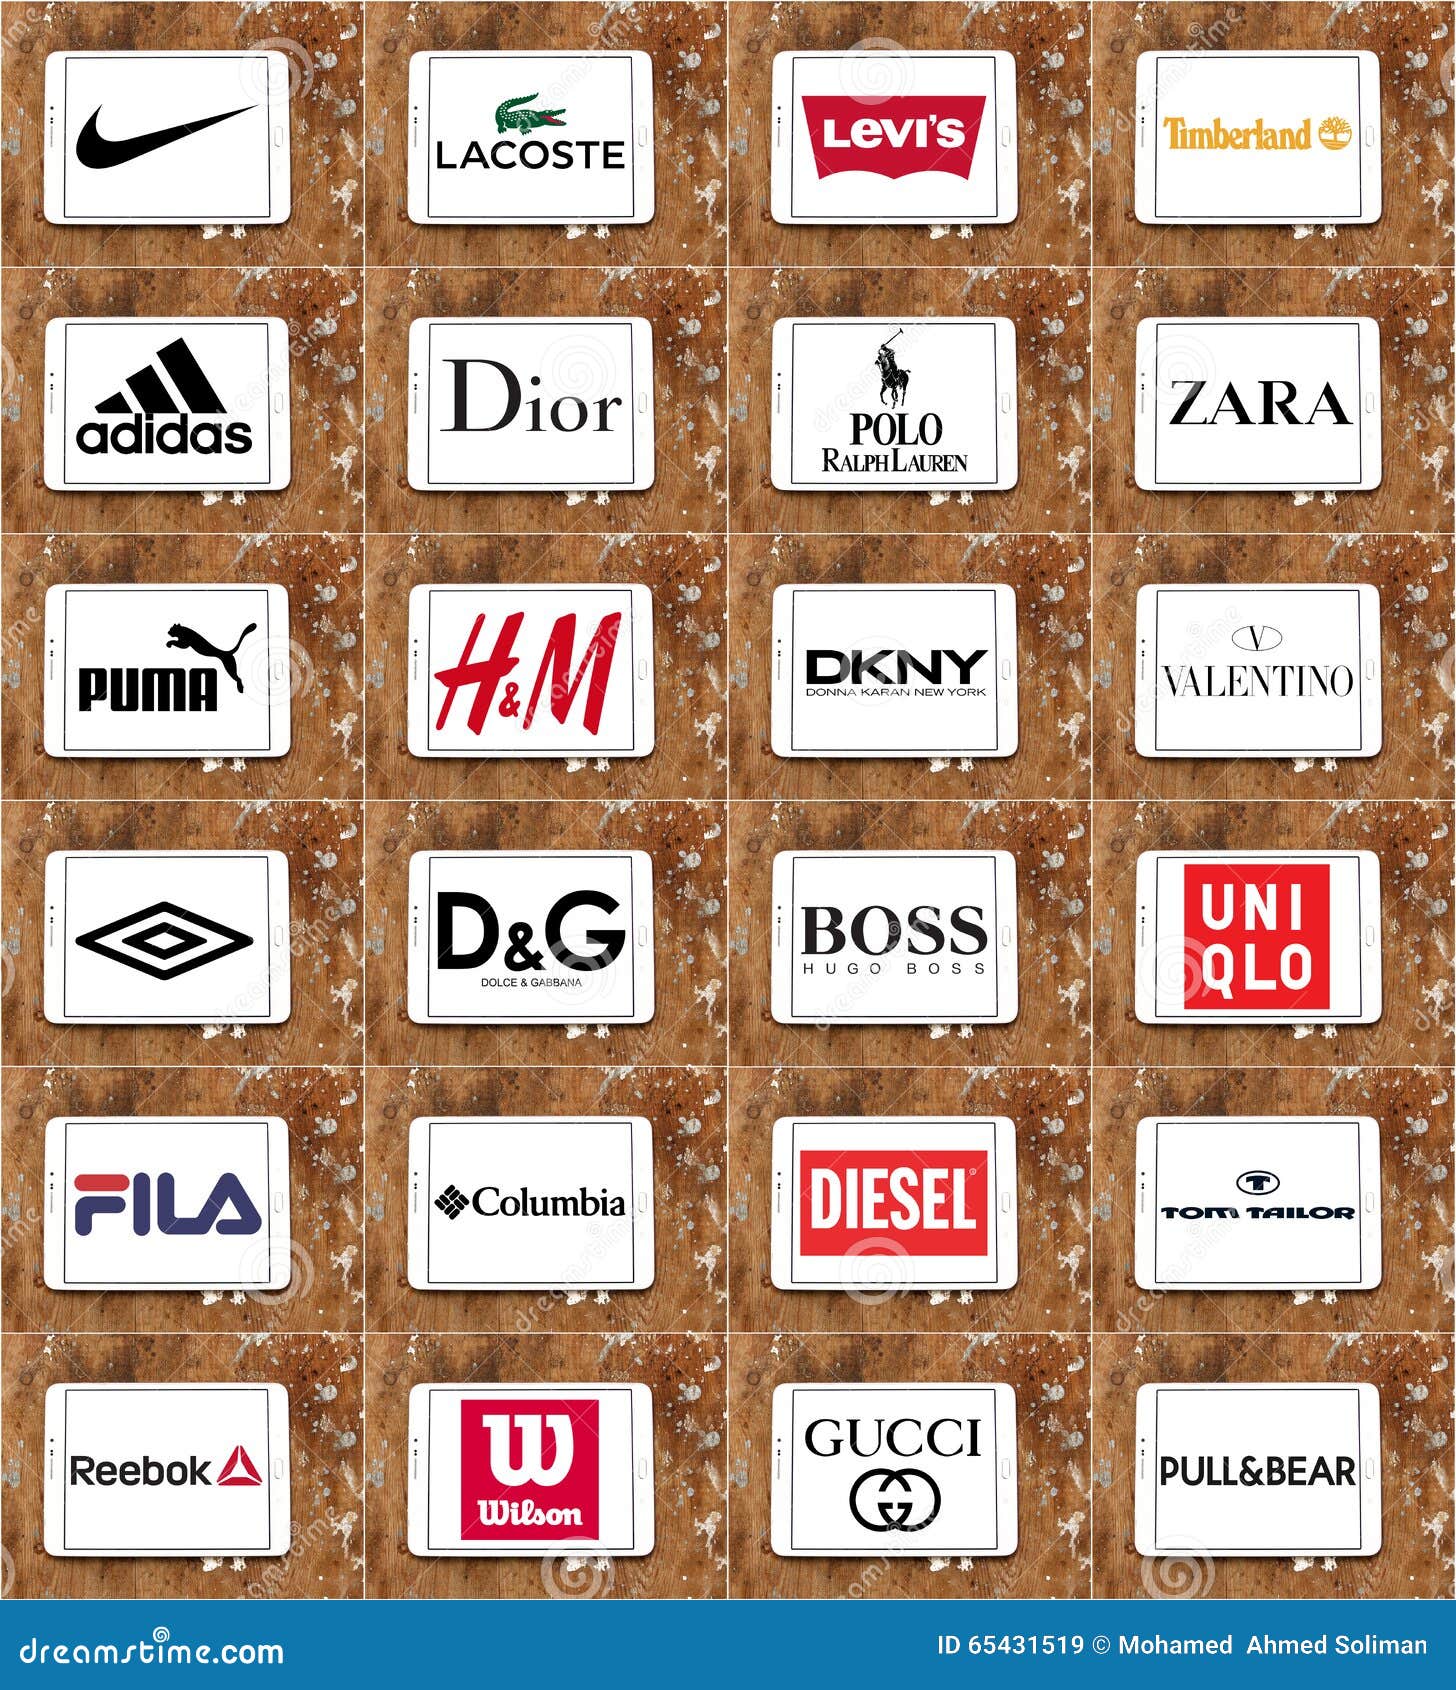 a to z fashion brands - www.solfis.rs